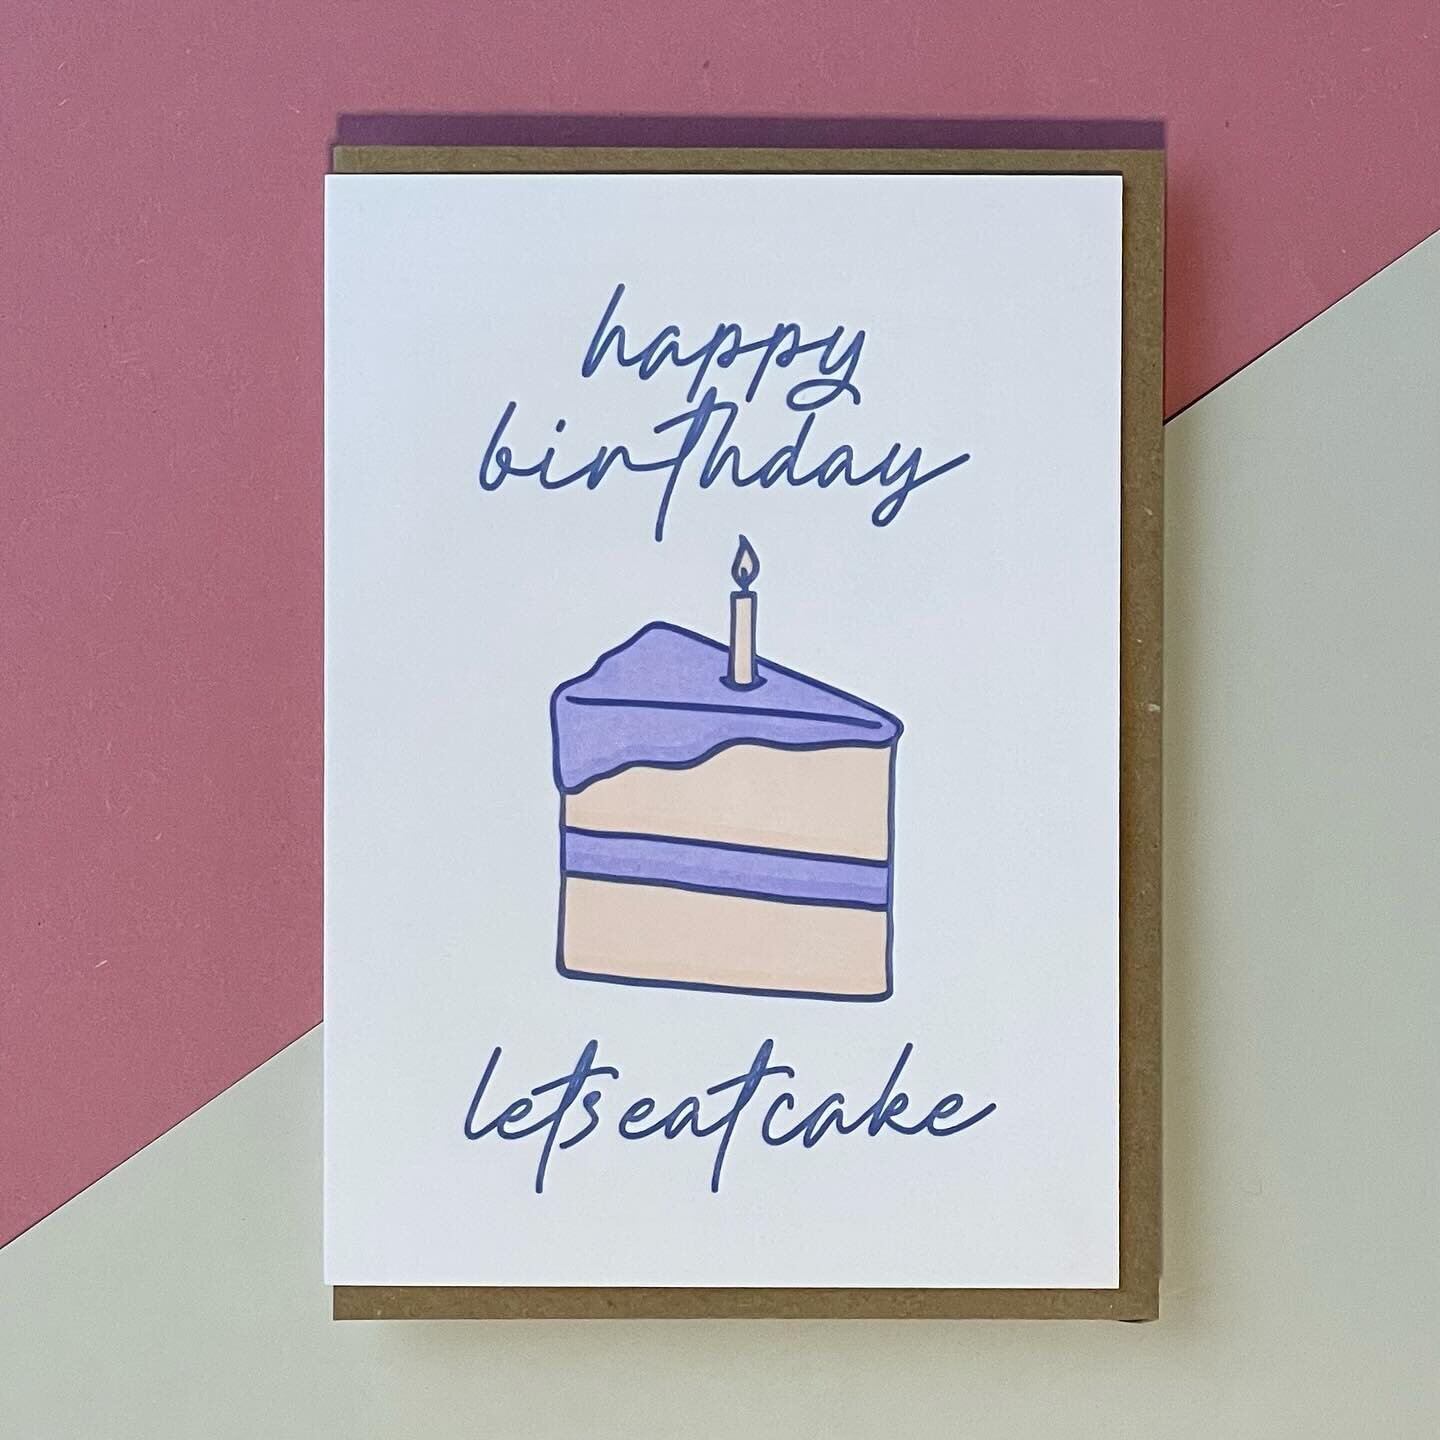 NEW birthday cards are on the website now. Go check them out 🥳 This one is all about 🍰 

Everything at Little Paper Soul is Letterpress printed in small batches on antique presses here in my home studio. All my papers are made from recycled materia